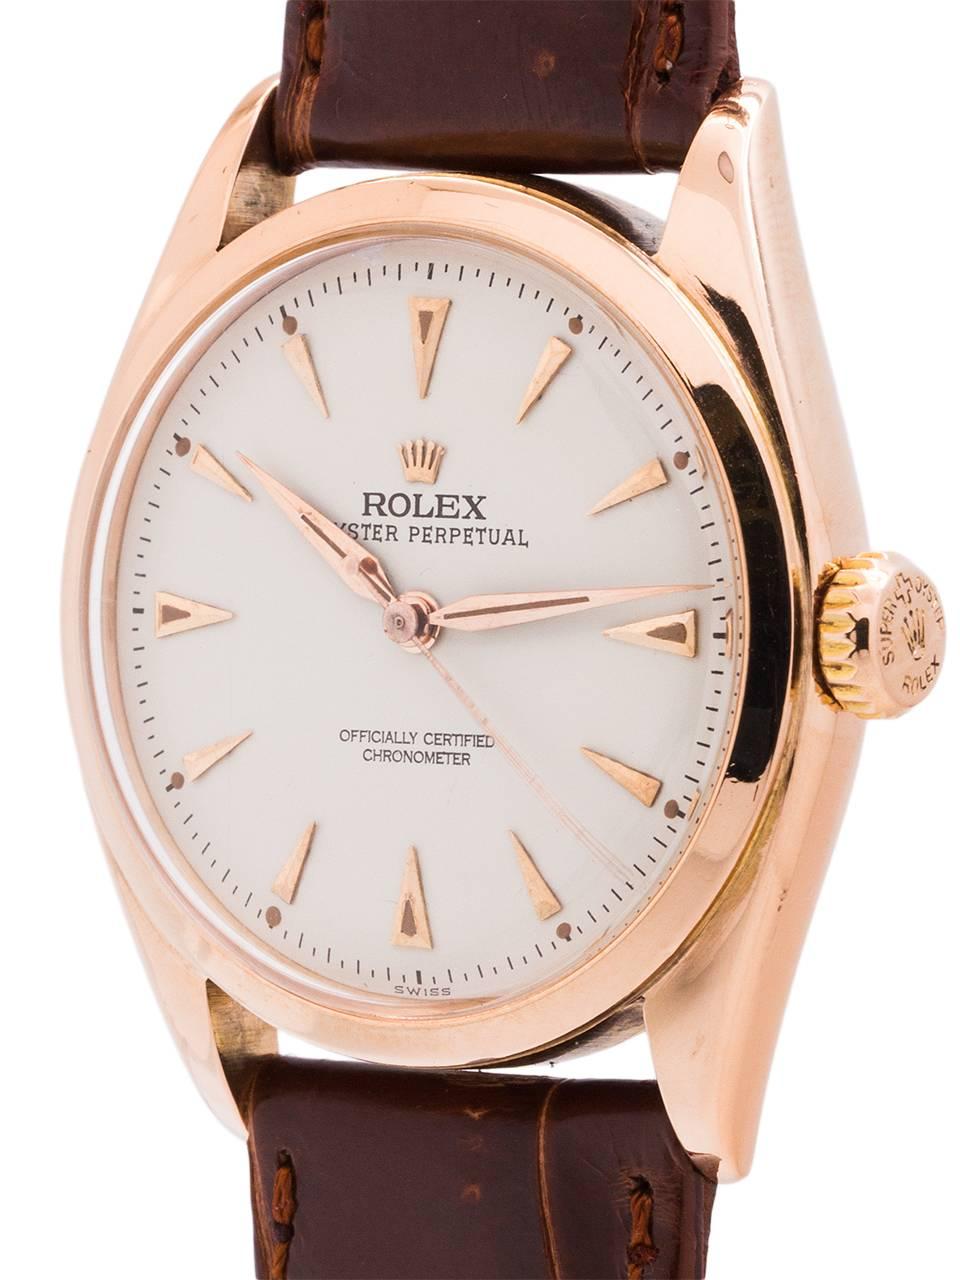 
Rolex 18K PG Oyster Perpetual ref# 6084 serial # 698,xxx circa 1952. Featuring a 34mm diameter case with smooth bezel and acrylic crystal. Very pleasing restored antique white dial with rose gold triangular indexes, applied rose gold Rolex crown